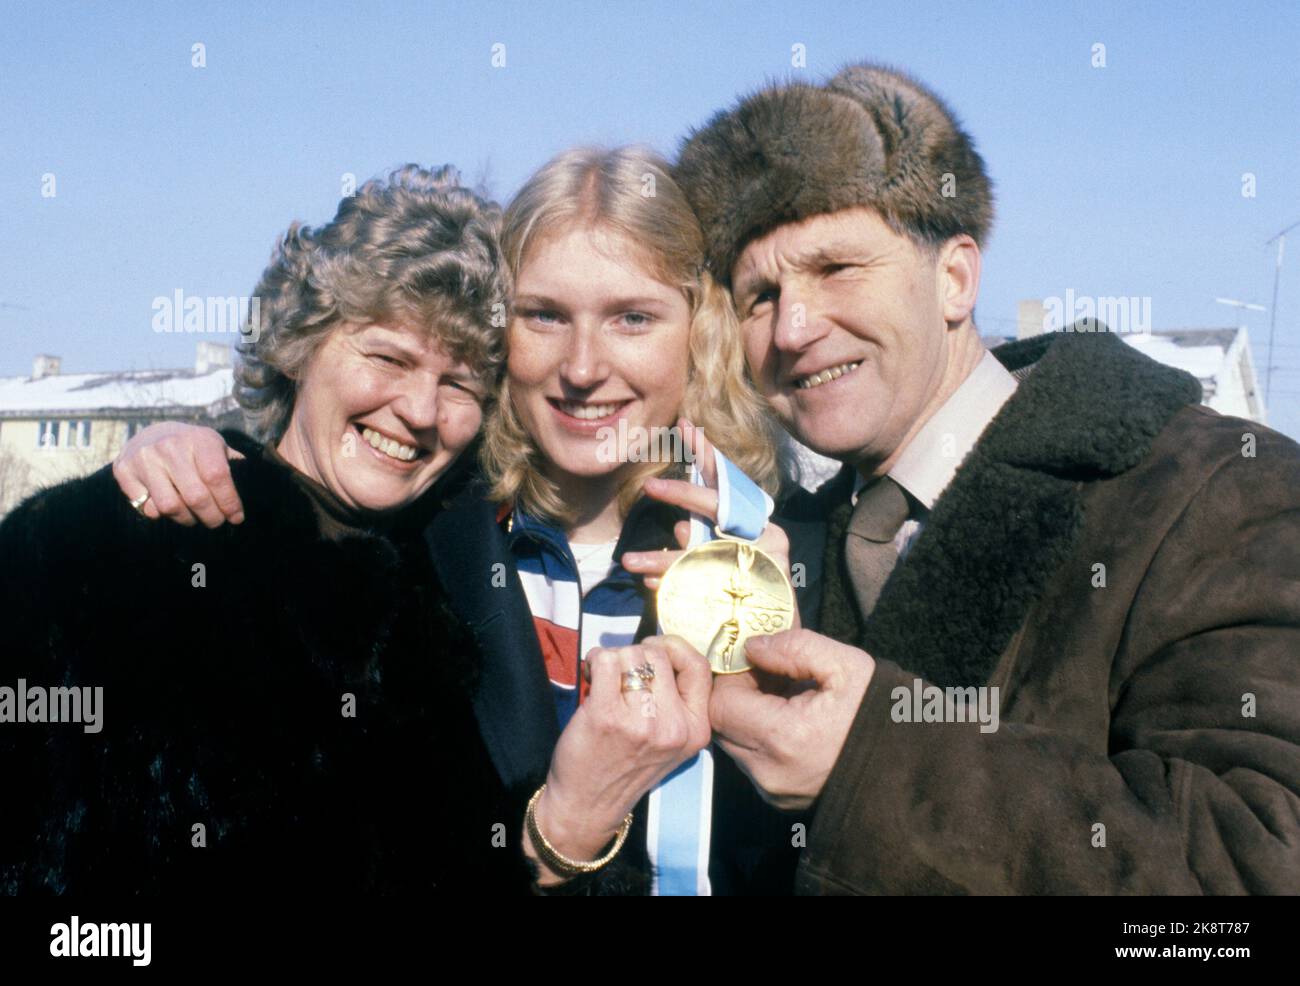 Lake Placid, N.Y., USA, 198002: Olympic Lake Placid 1980. Picture: Skater Bjørg Eva Jensen, who took gold at 3000m. Here she shows the gold medal with her parents after returning to Norway. (Date Missing)  Photo: NTB / EPU / NTB Stock Photo